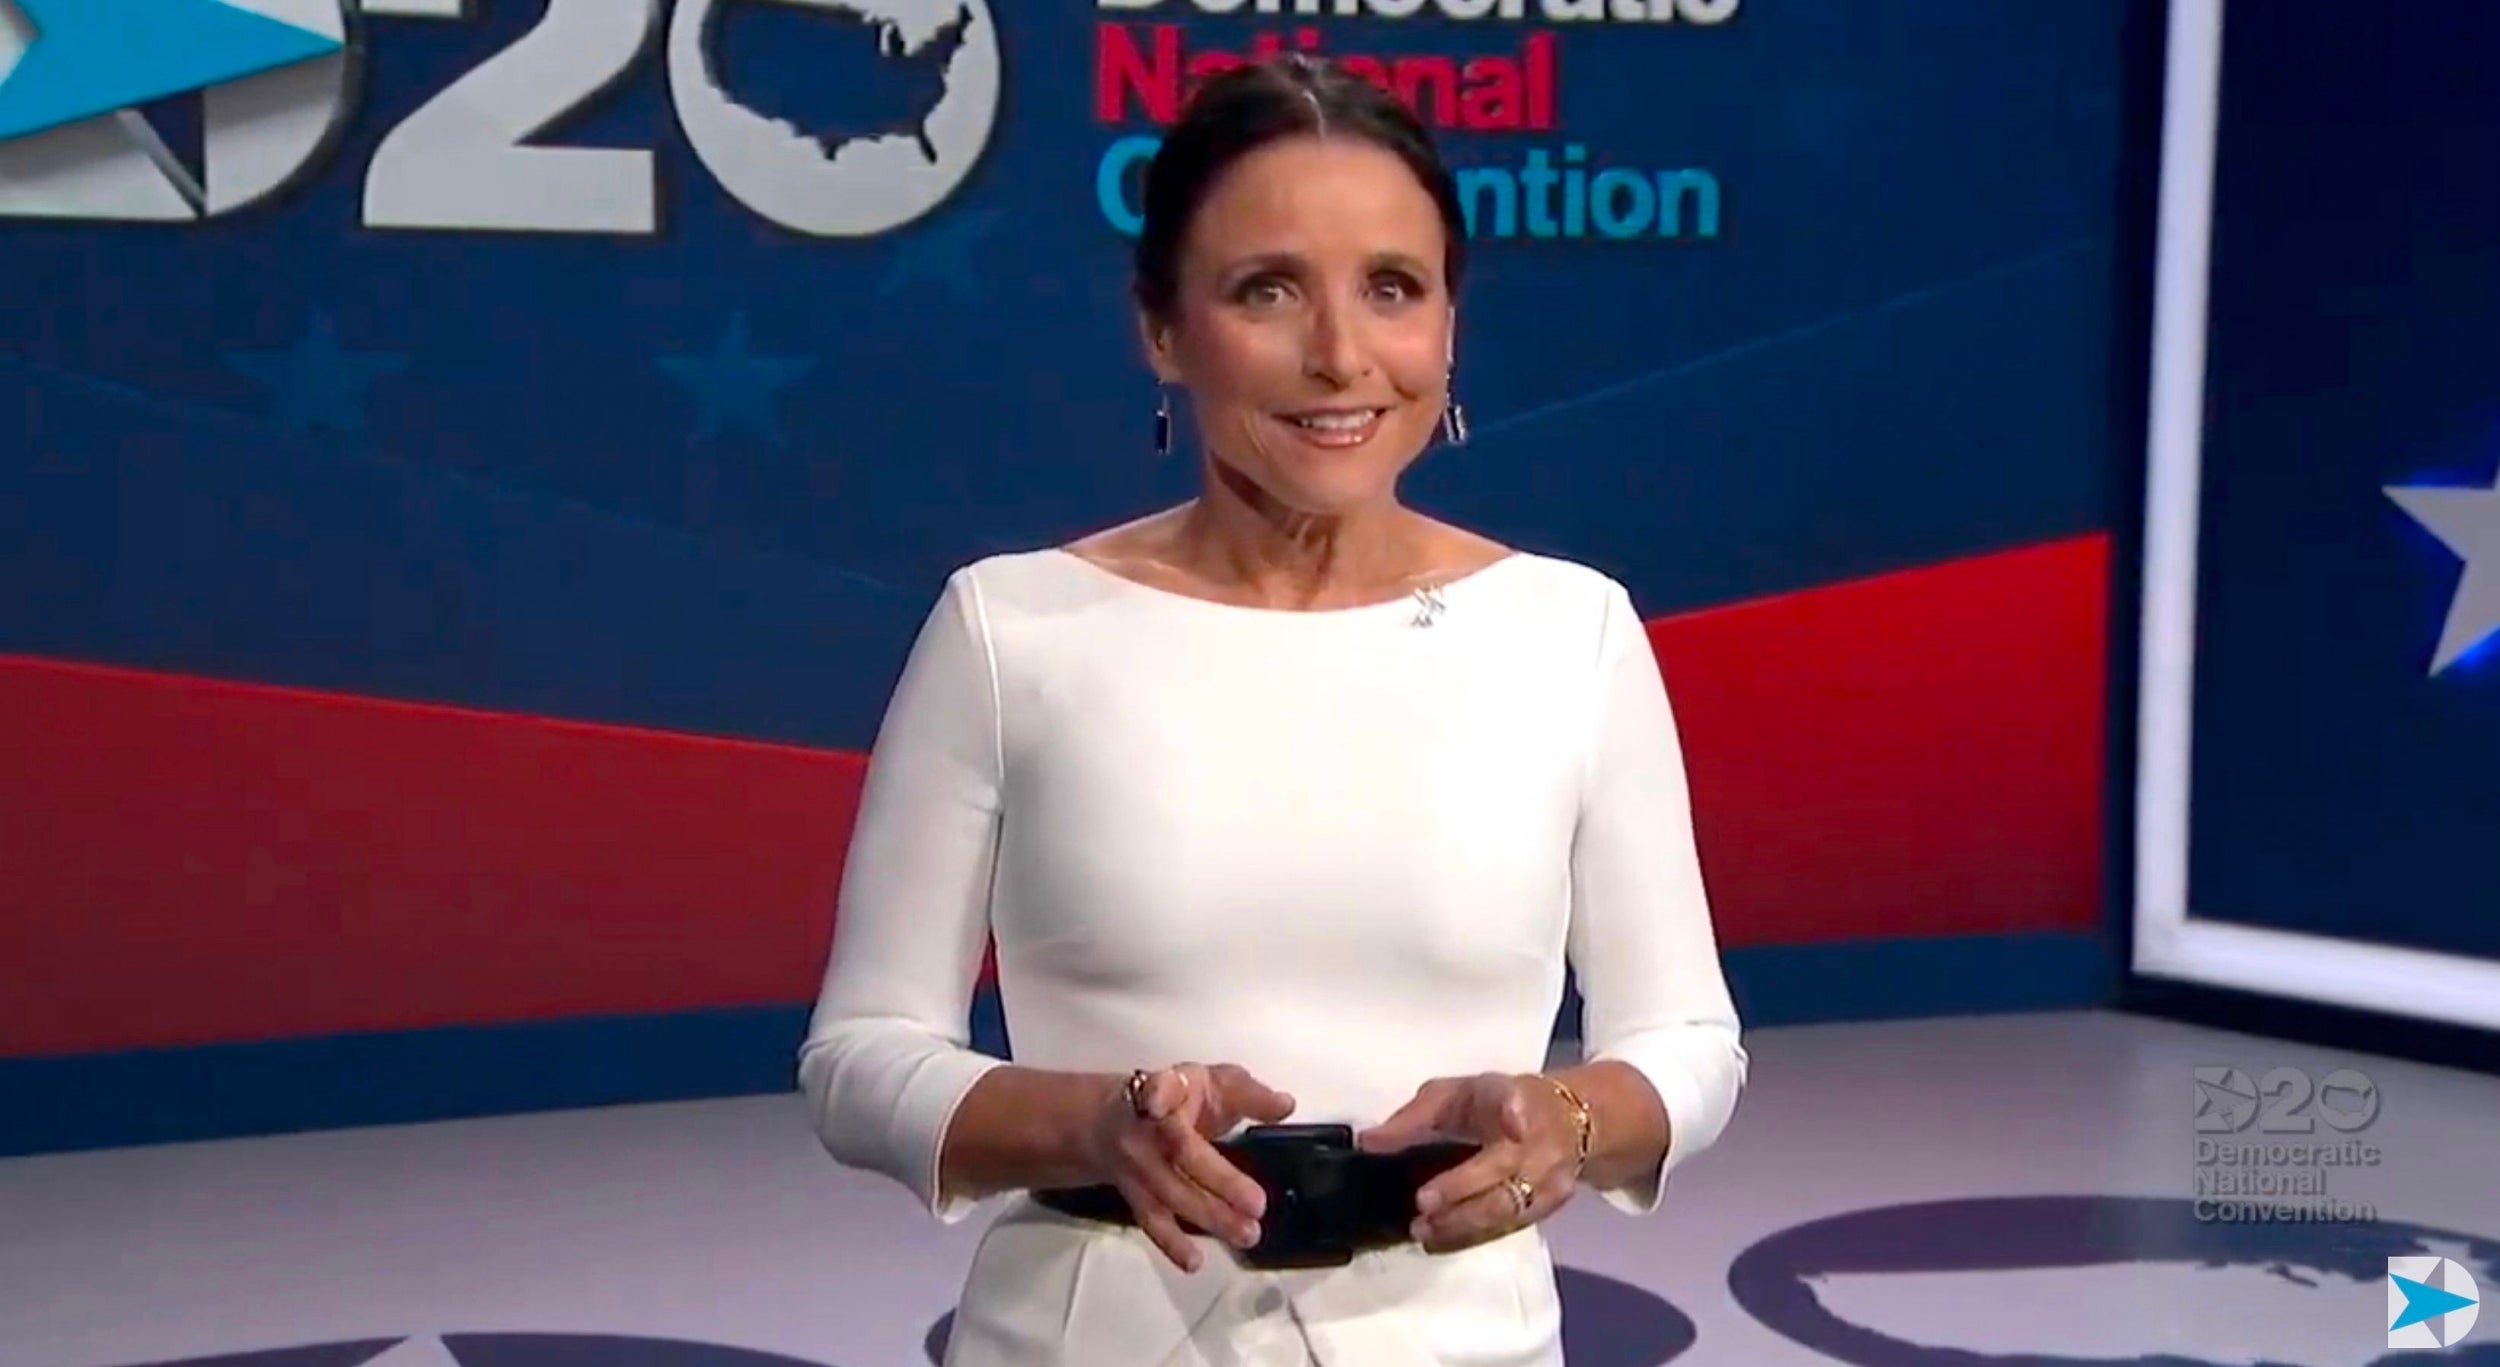 'I'm proud to be a nasty woman': Fictional Veep Julia Louis-Dreyfus takes down Trump in DNC speech